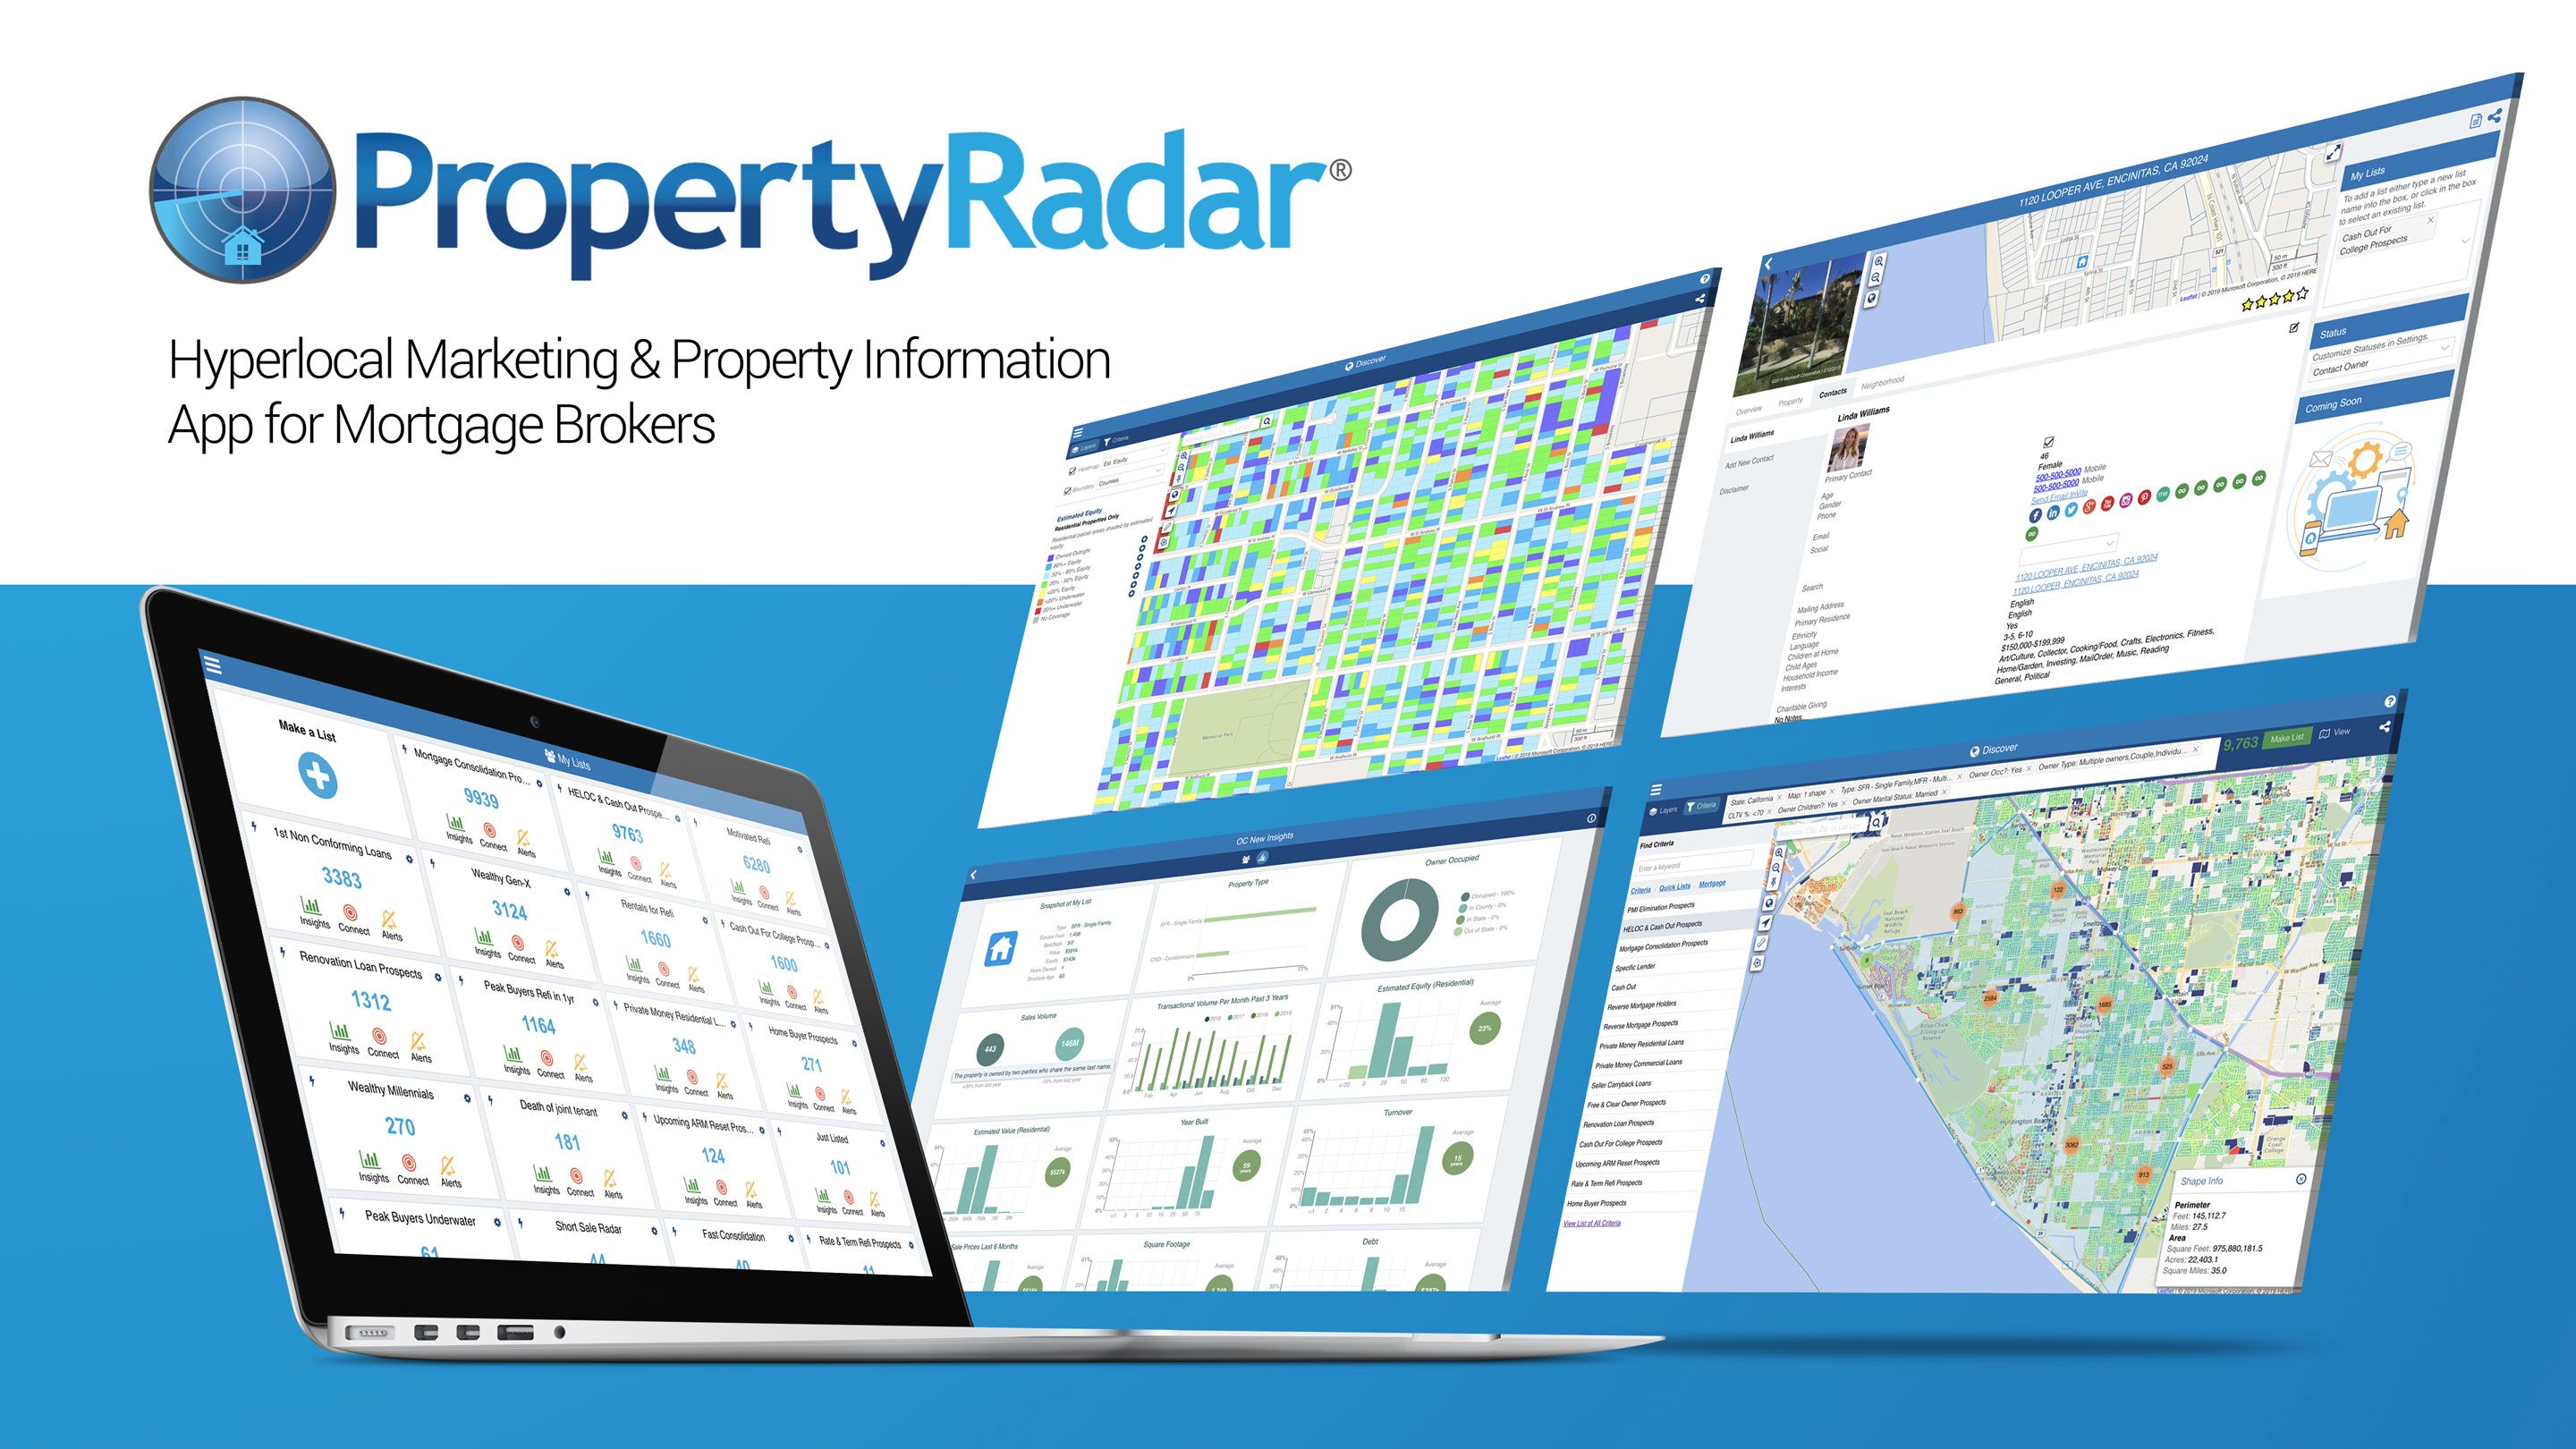 PropertyRadar has released its latest upgrade, including new comprehensive loan criteria that mortgage brokers use to drive new business directly